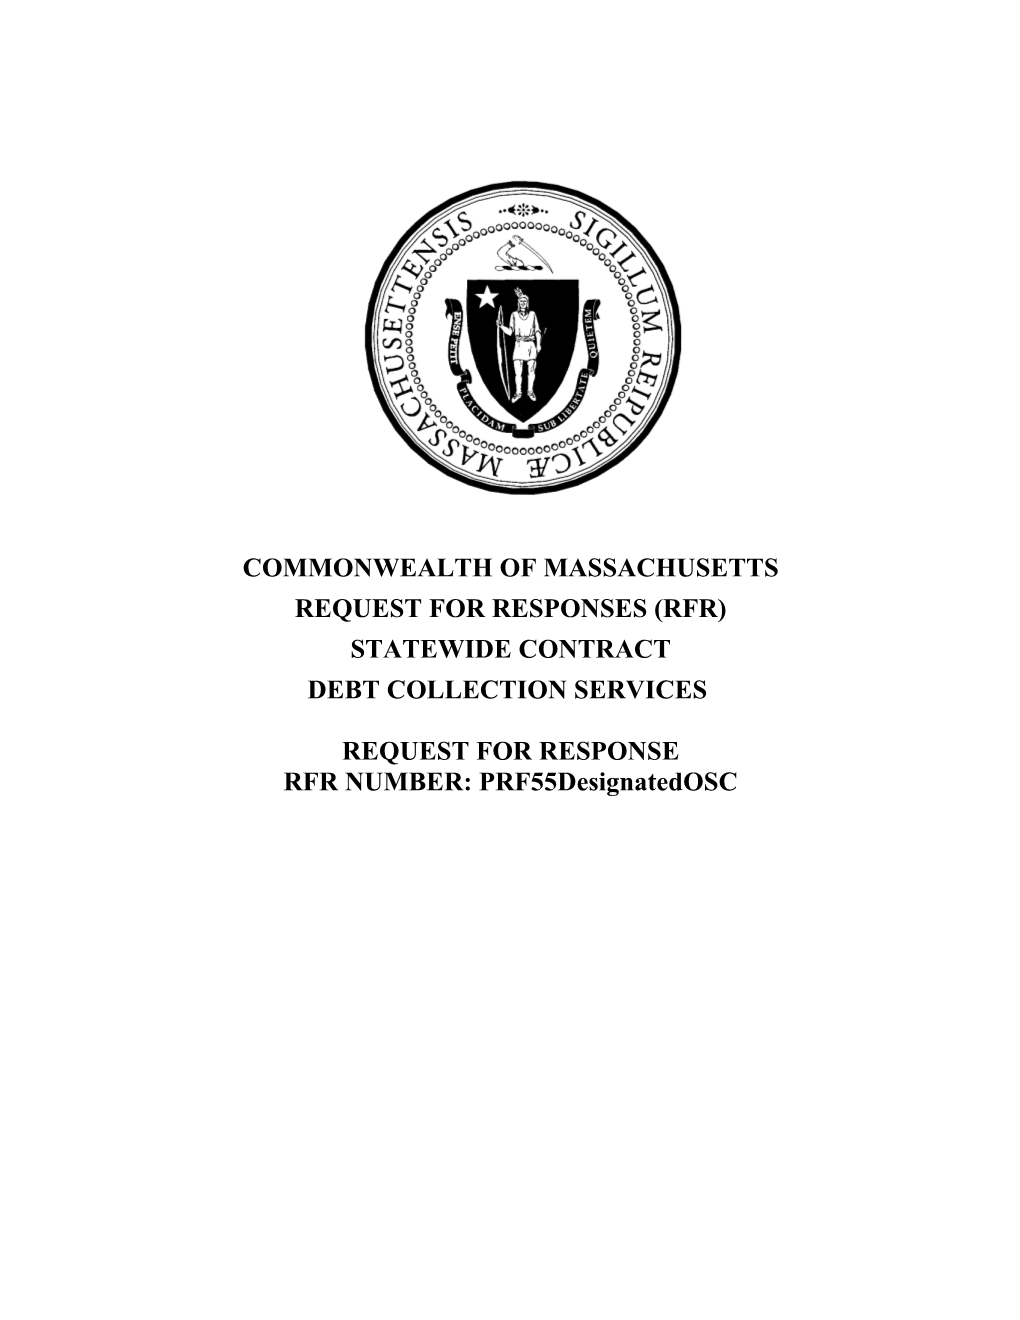 Procuring Department: OFFICE of the COMPTROLLER